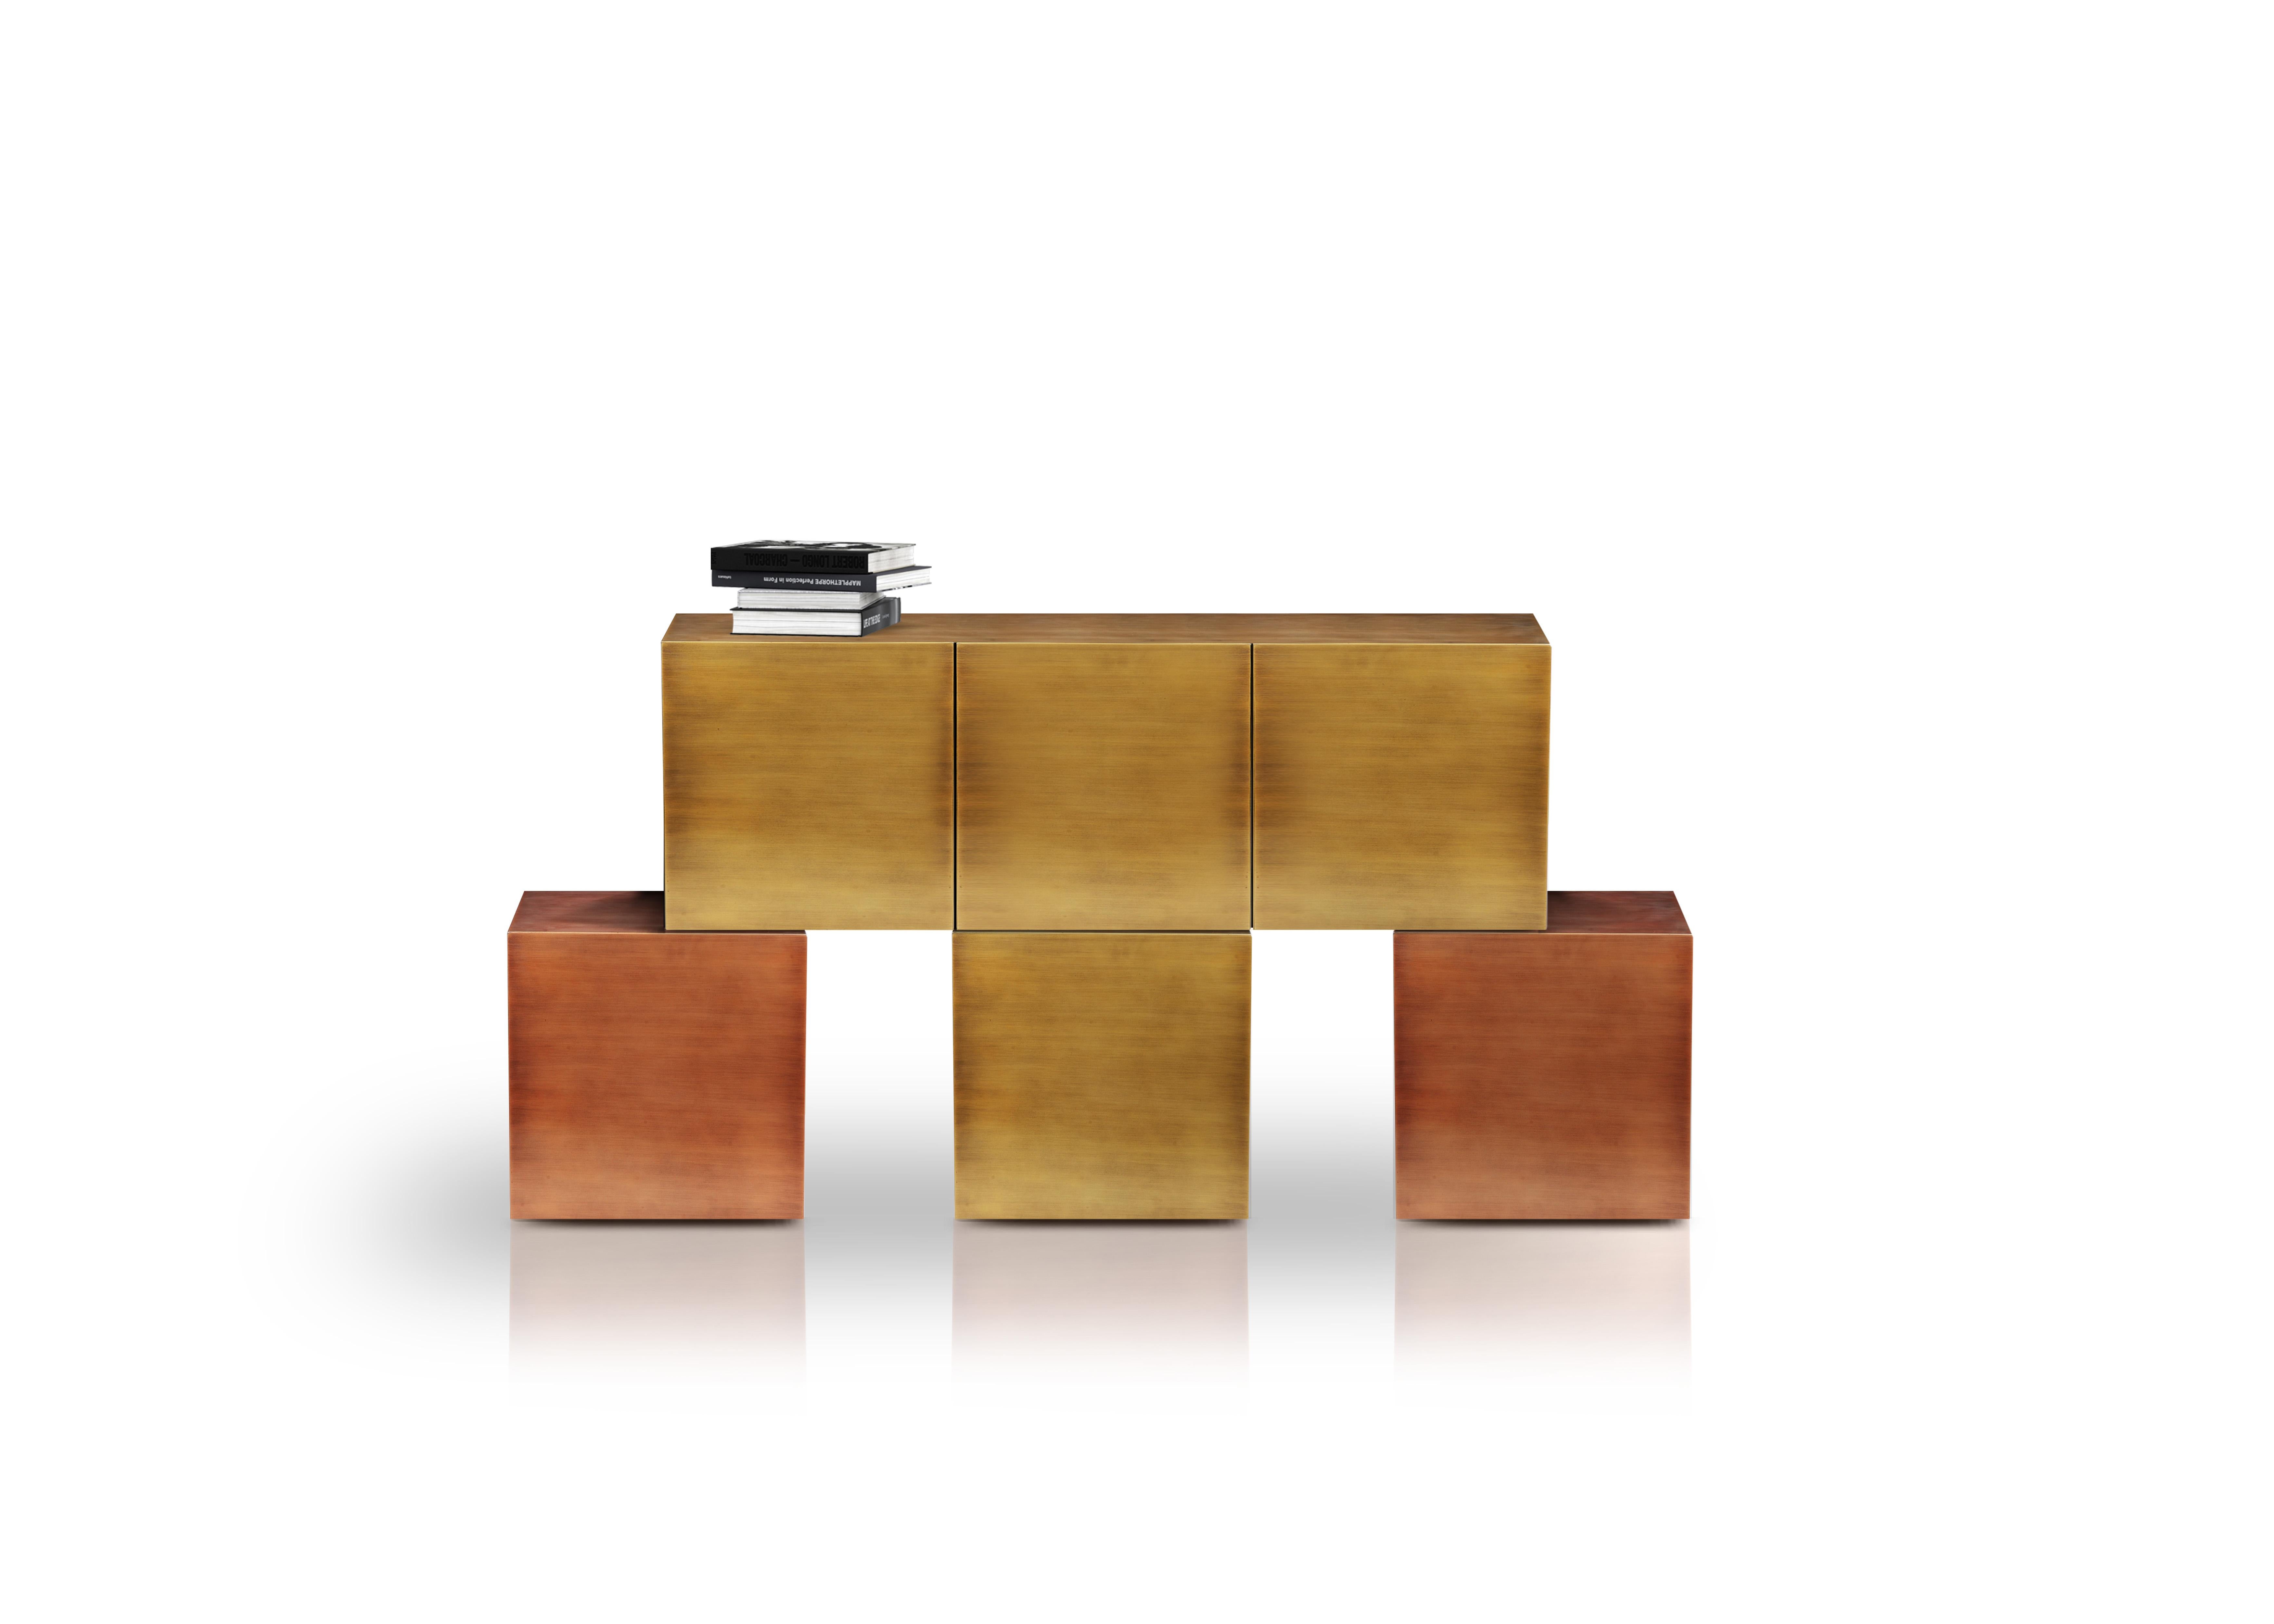 Cucu sideboard by Railis Design is the perfect addition to any modern living room or dining room. Store away your plates or knickknacks in a stylish way. Made from brushed brass and copper. The Cube sideboard comes with six doors that open and eight